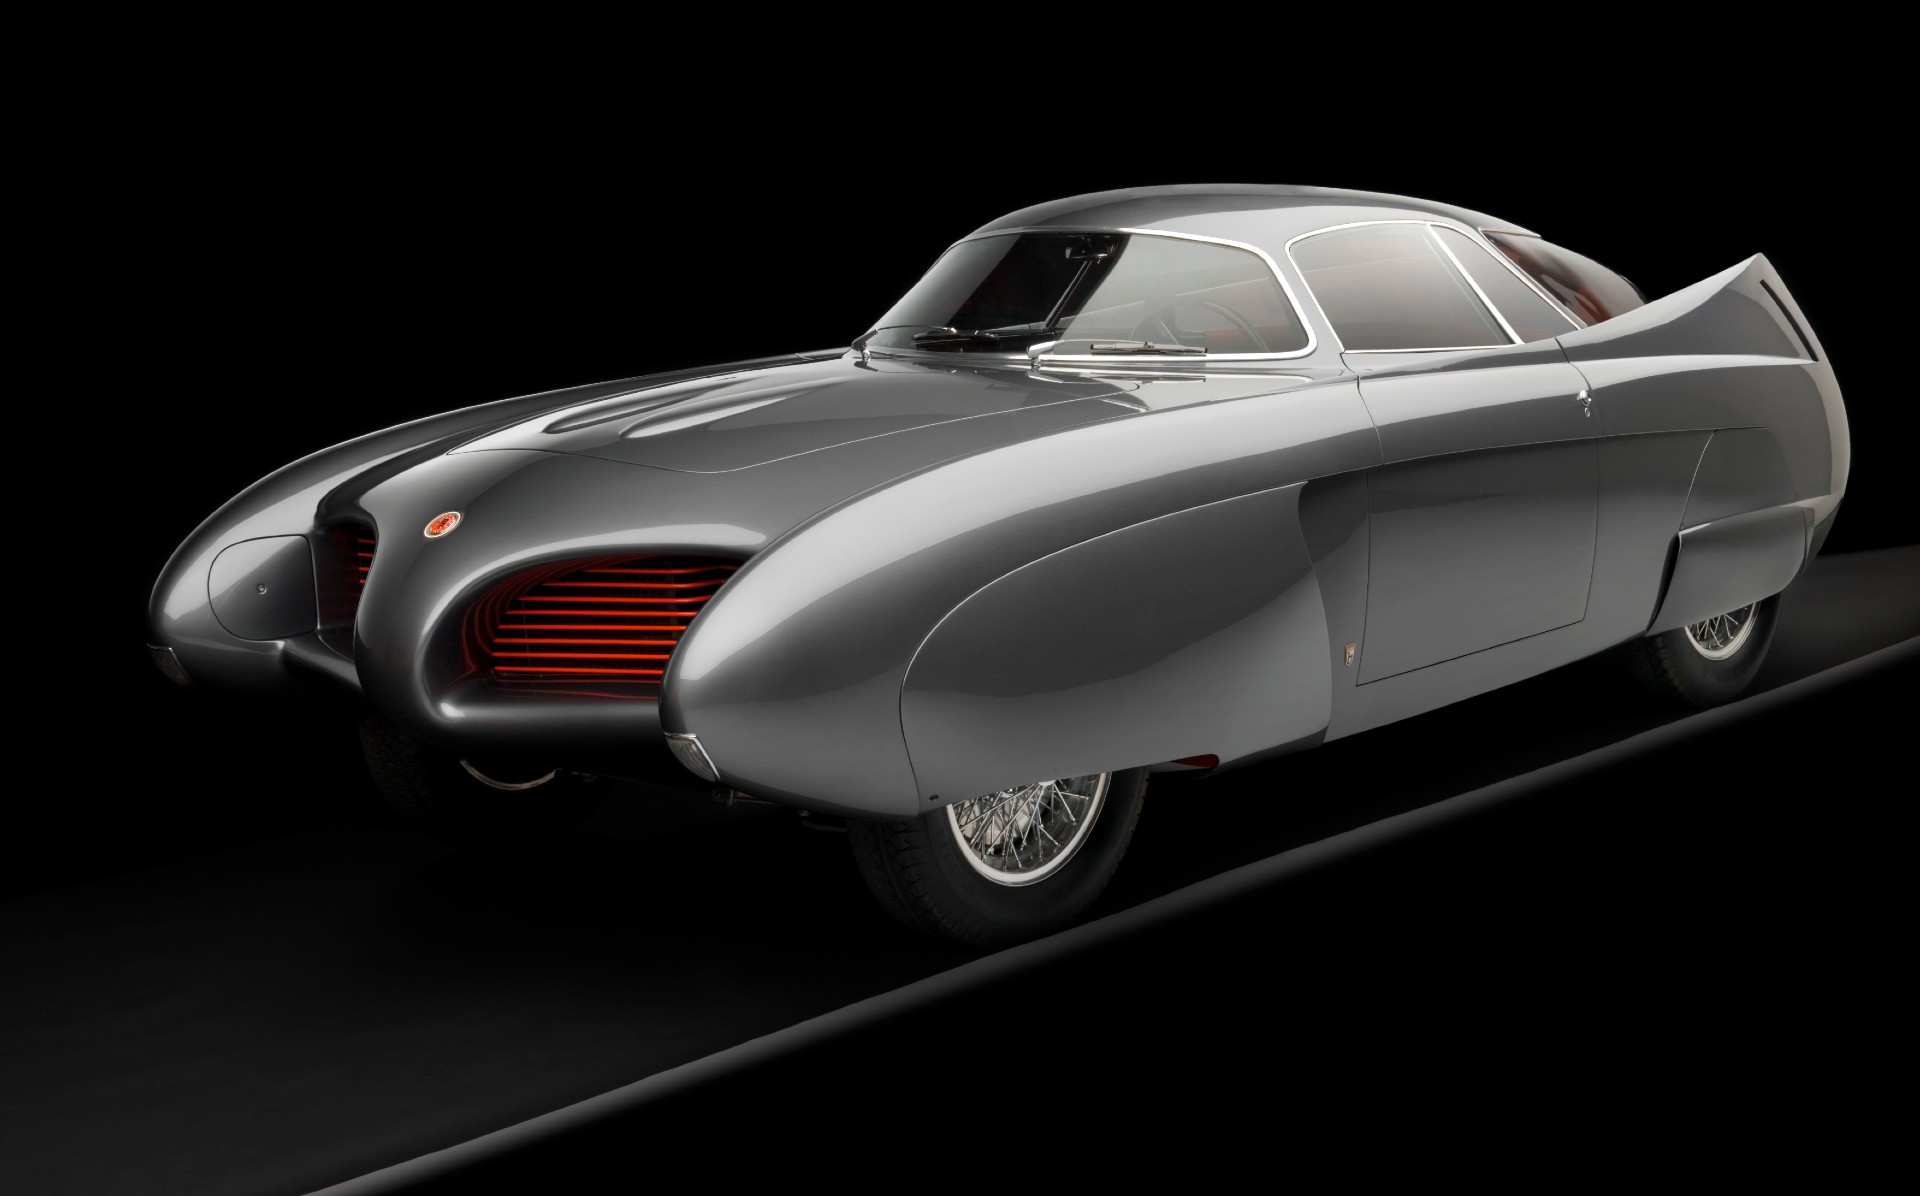 Extraordinary 1950s Alfa Romeo BAT concept cars could fetch £15.5m at auction